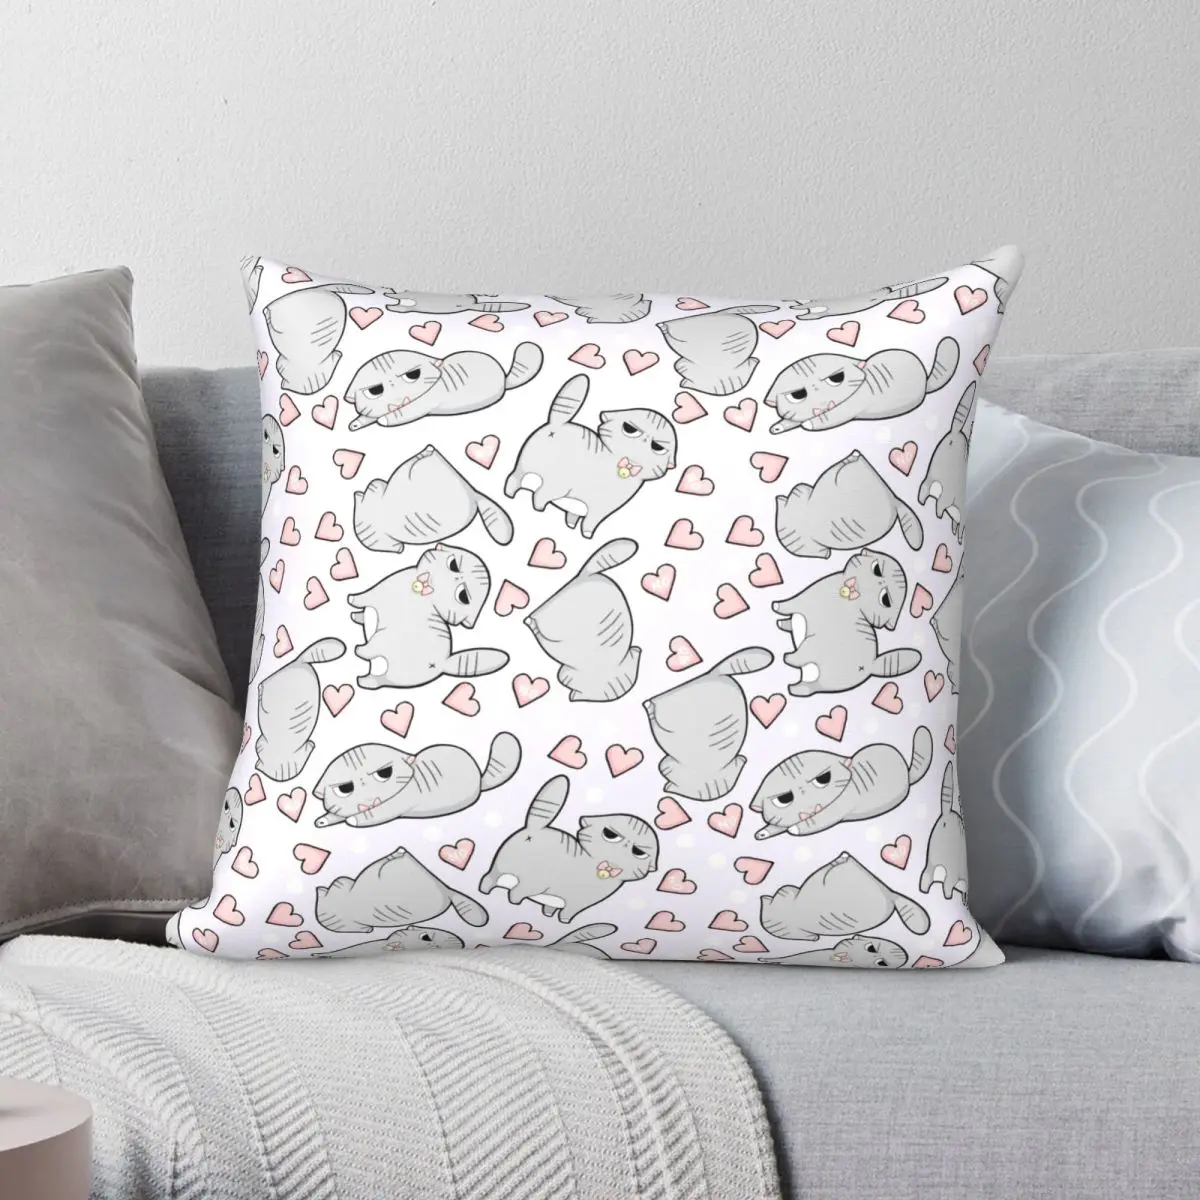 

Angry Cat Candy Hearts Pillowcase Polyester Linen Velvet Pattern Zip Decor Throw Pillow Case Bed Cushion Cover 45x45